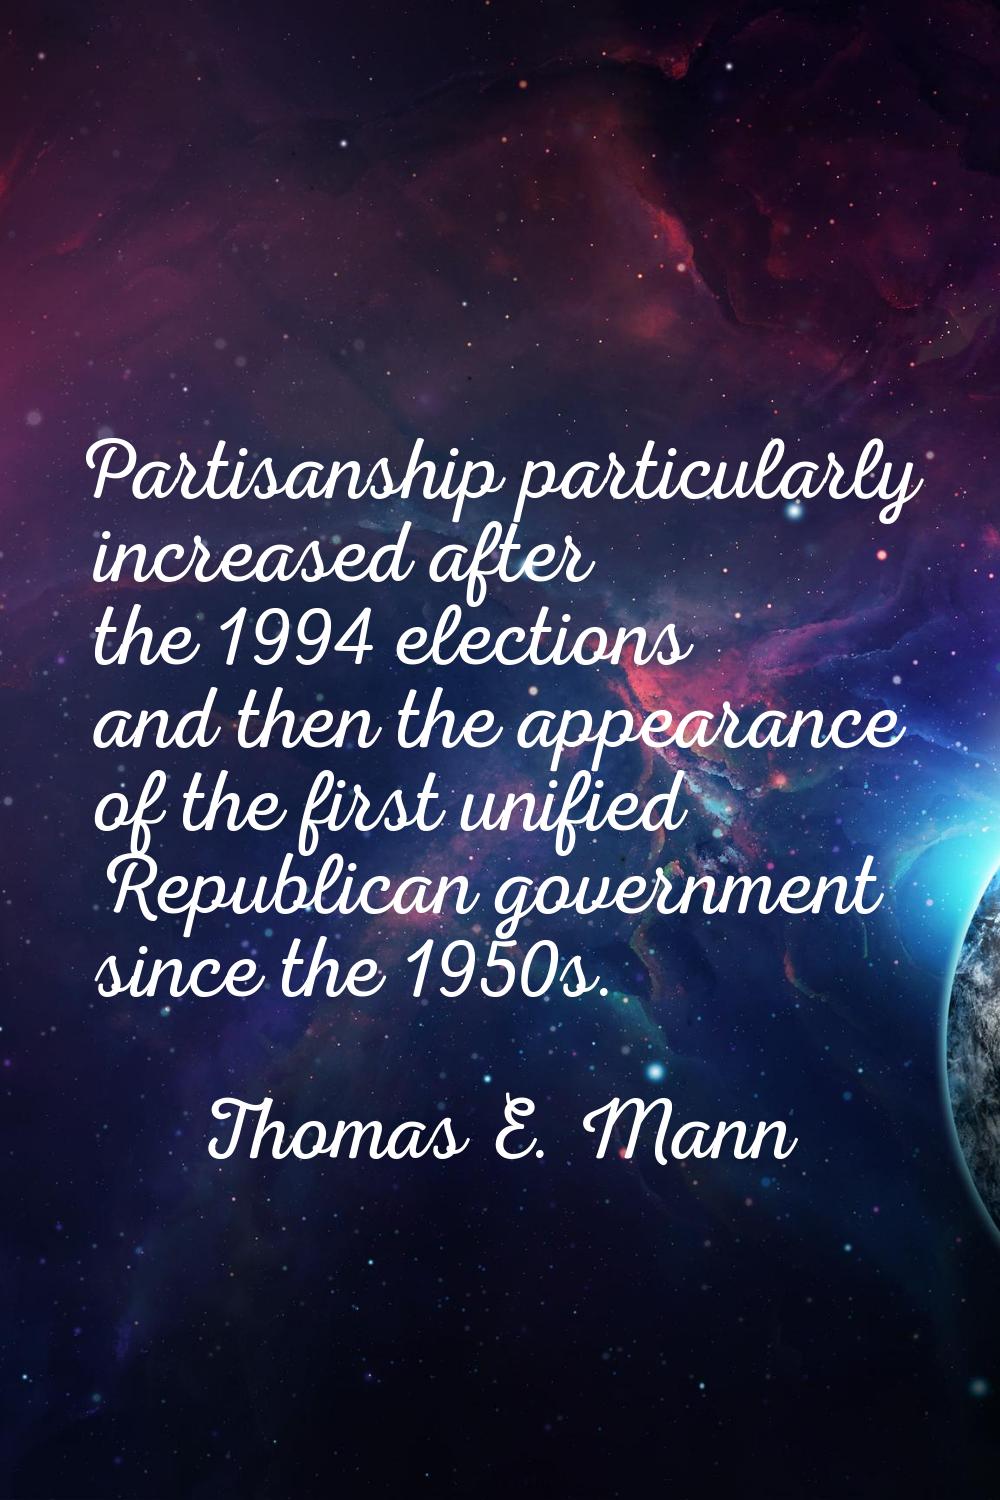 Partisanship particularly increased after the 1994 elections and then the appearance of the first u